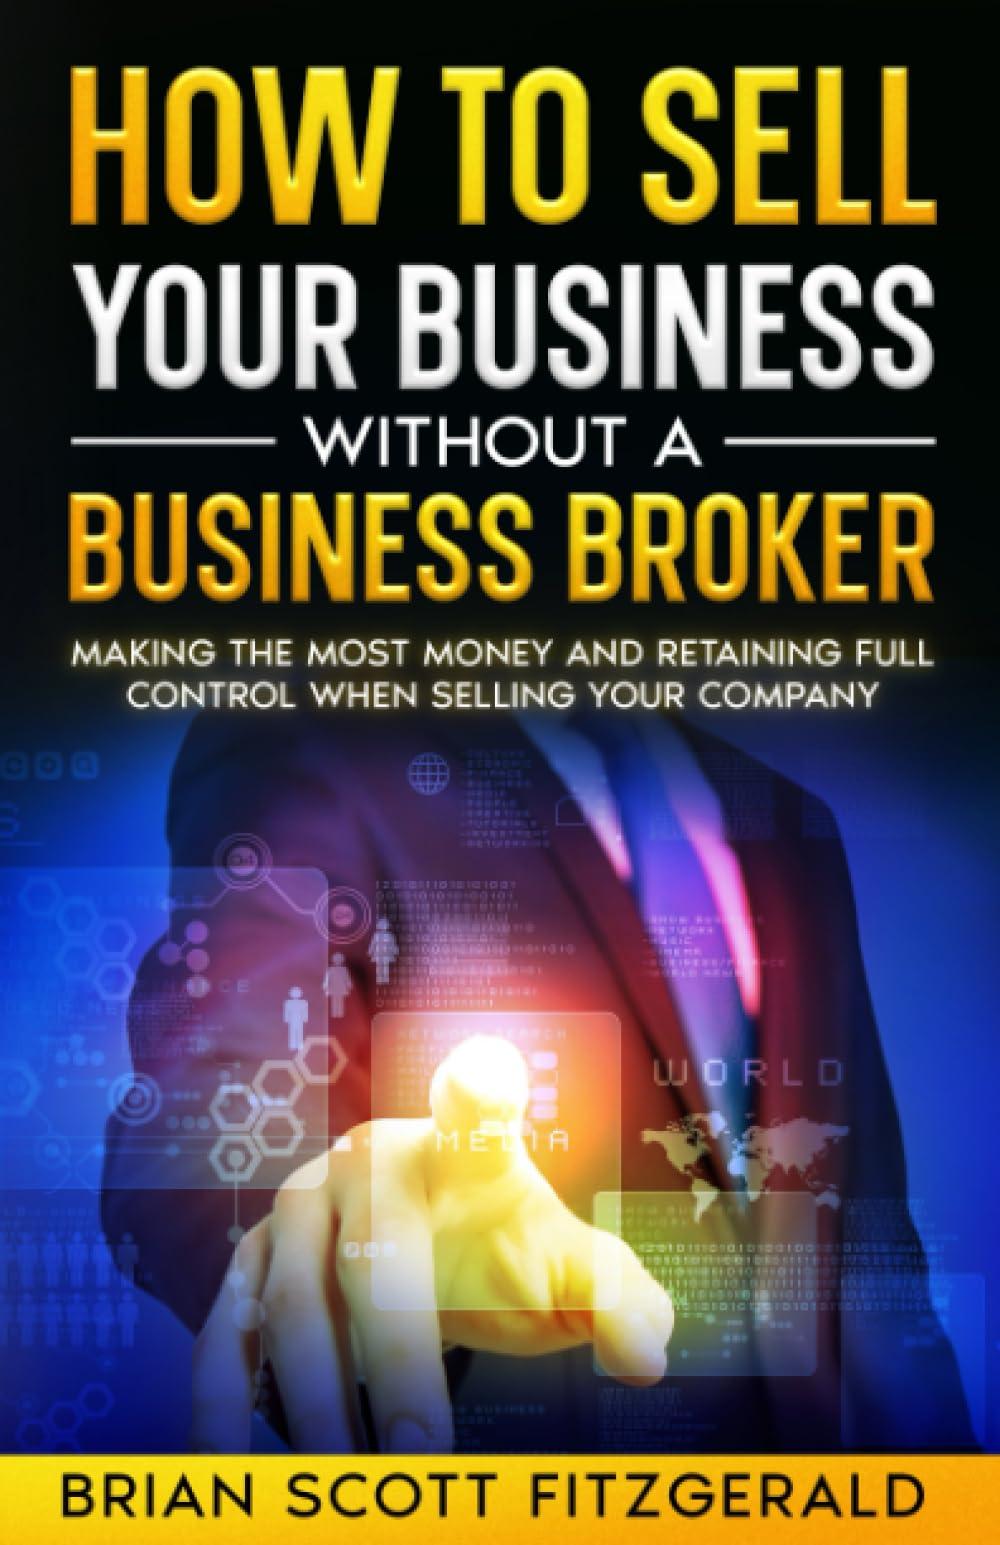 How To Sell Your Business Without A Business Broker Making The Most Money And Retaining Full Control When Selling Your Company